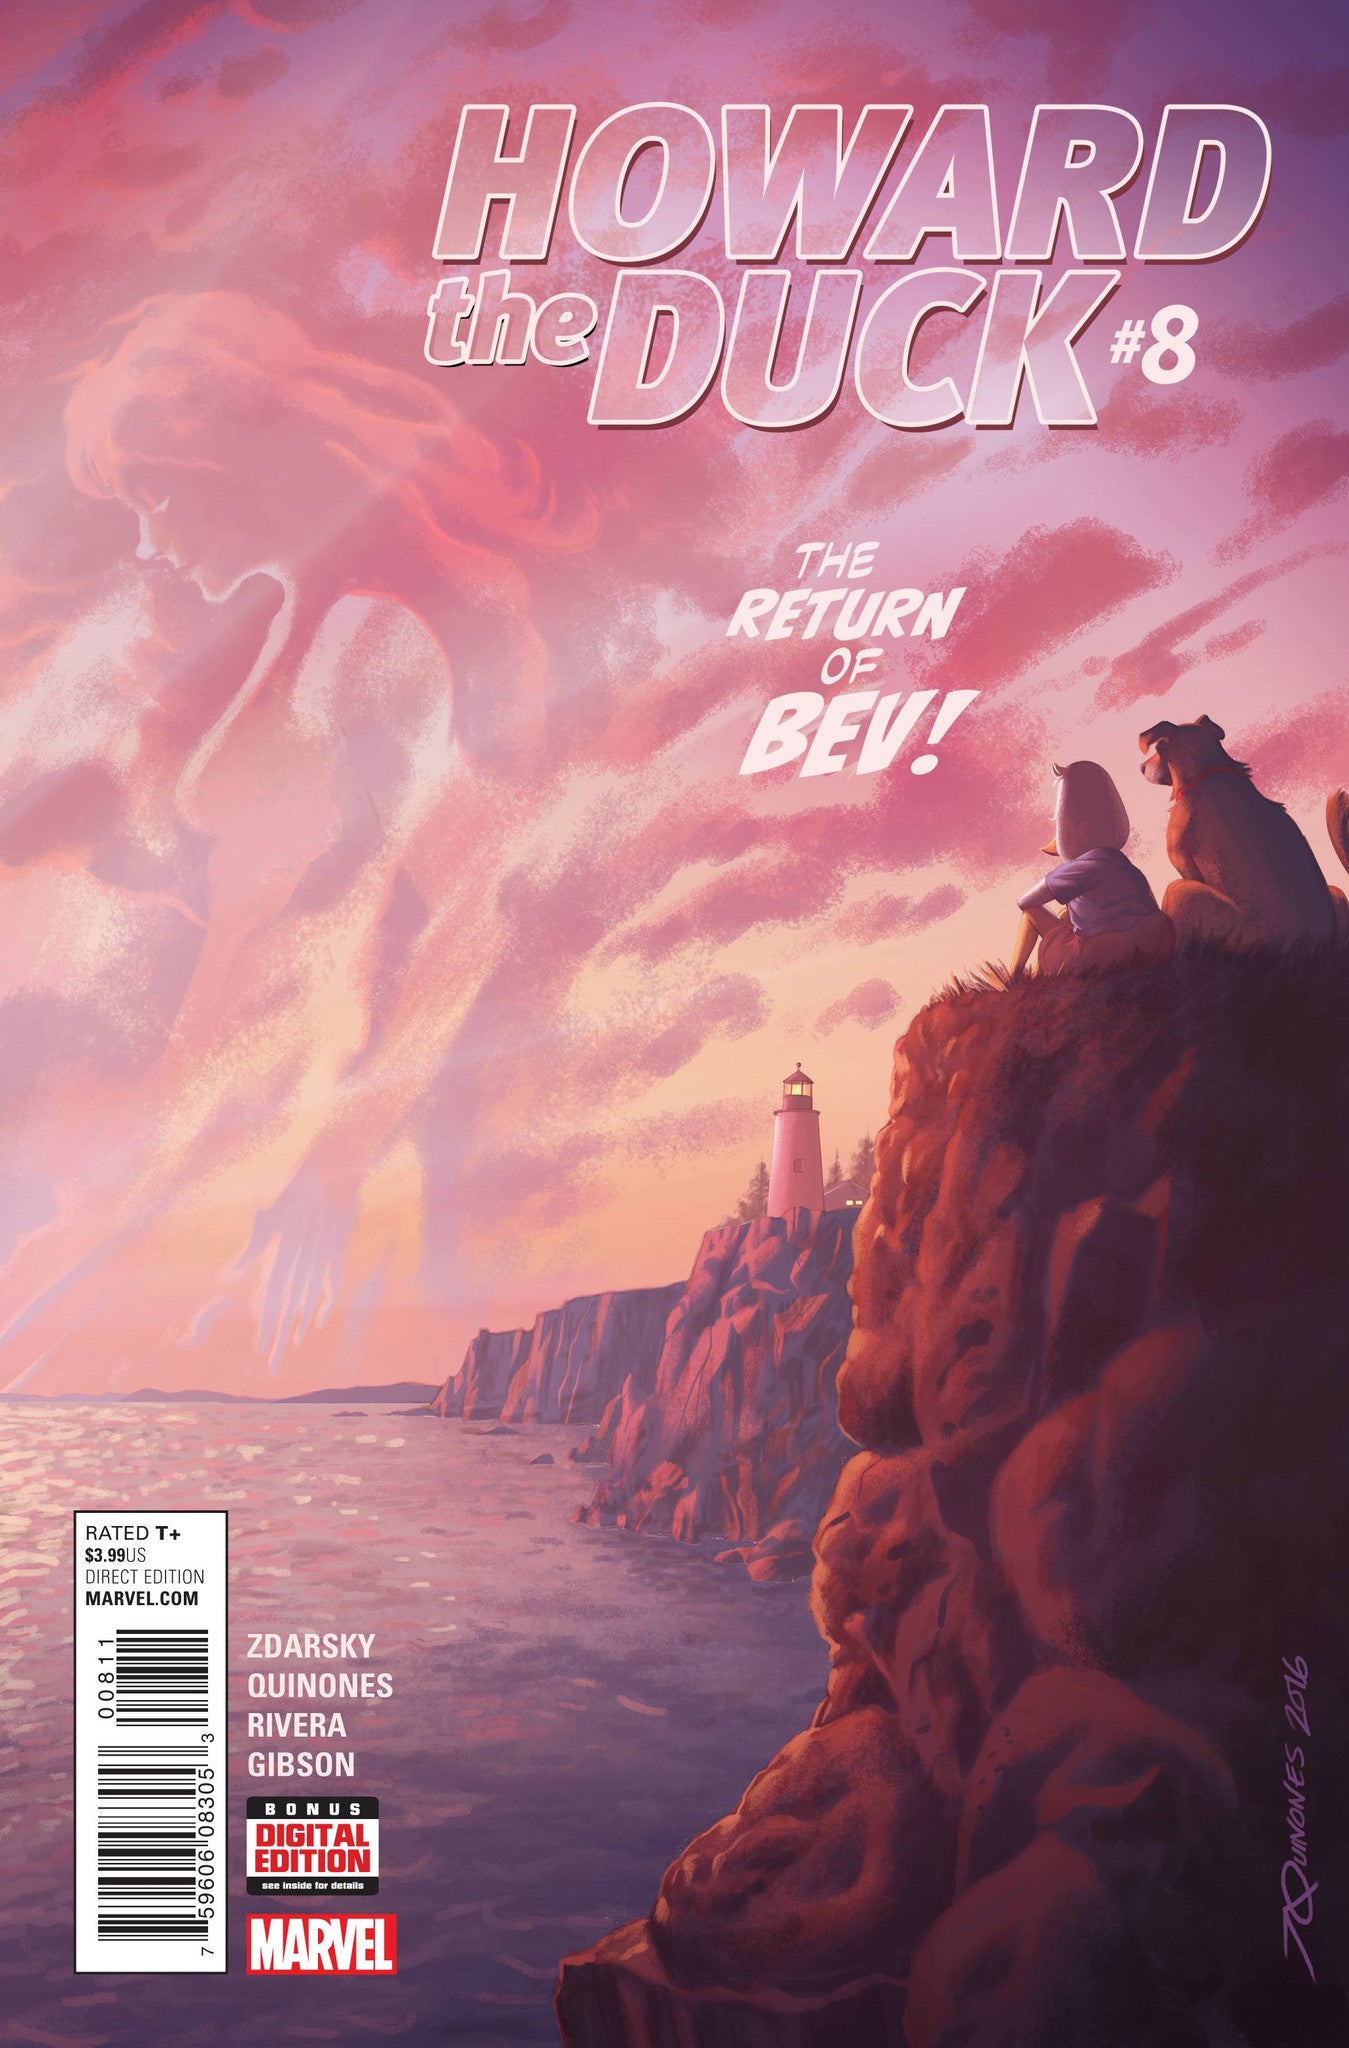 HOWARD THE DUCK #8 COVER